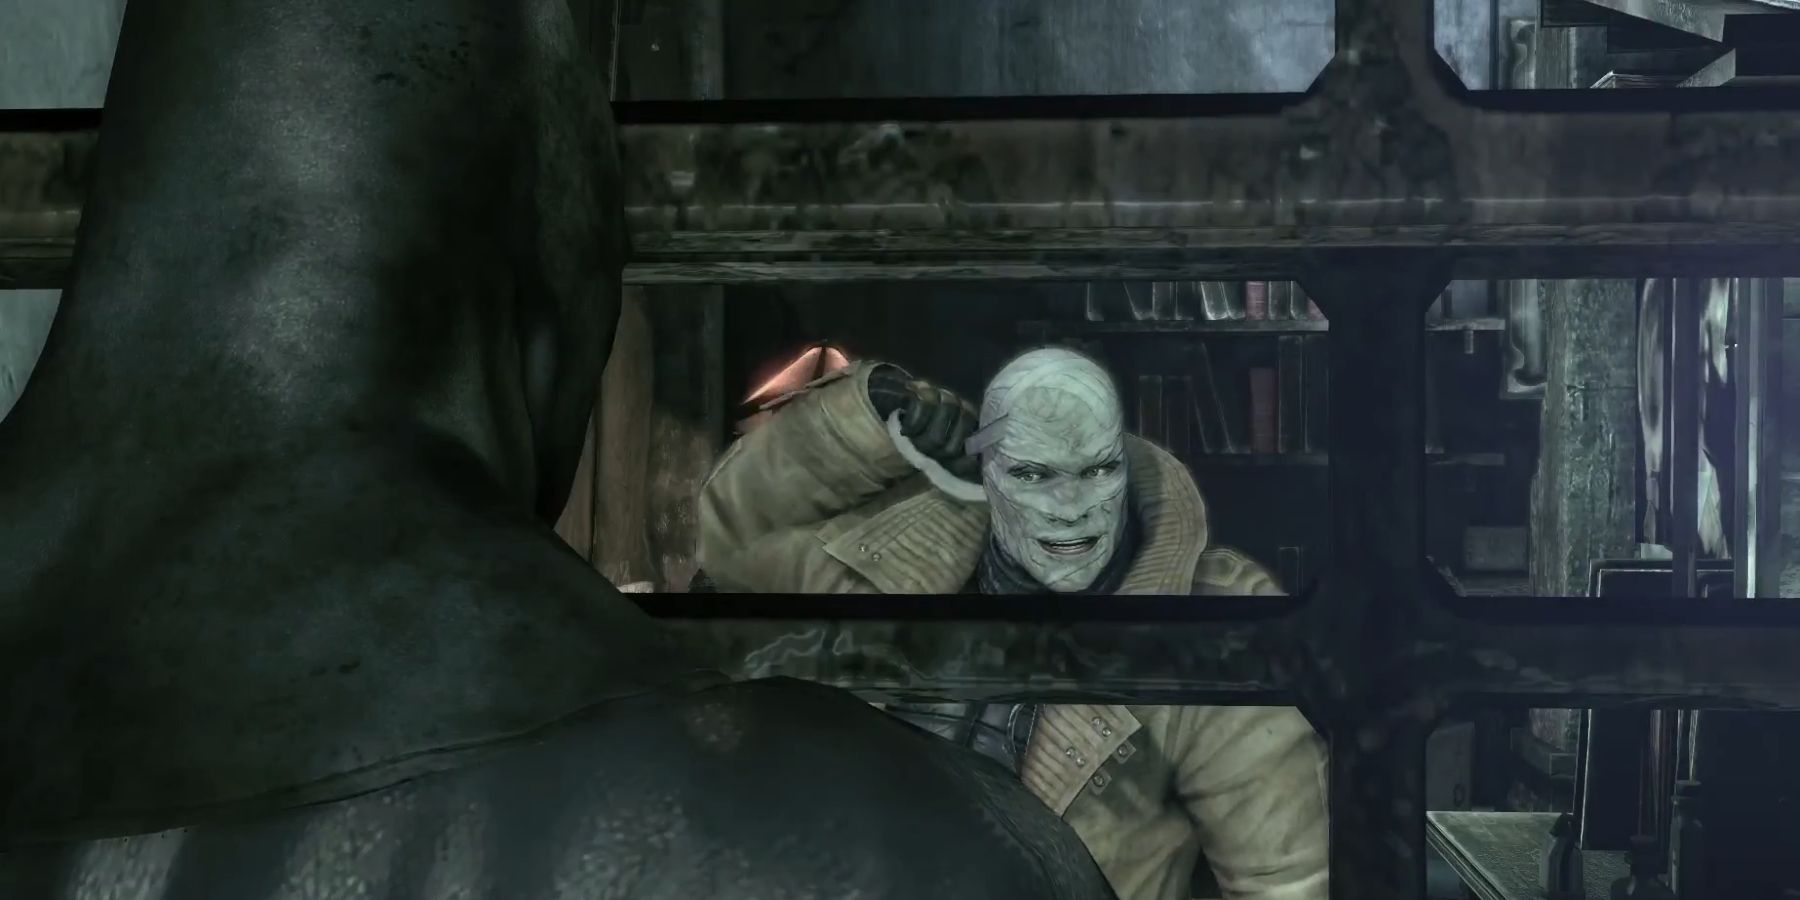 Hush unwrapping his mask in front of Batman in Batman Arkham City